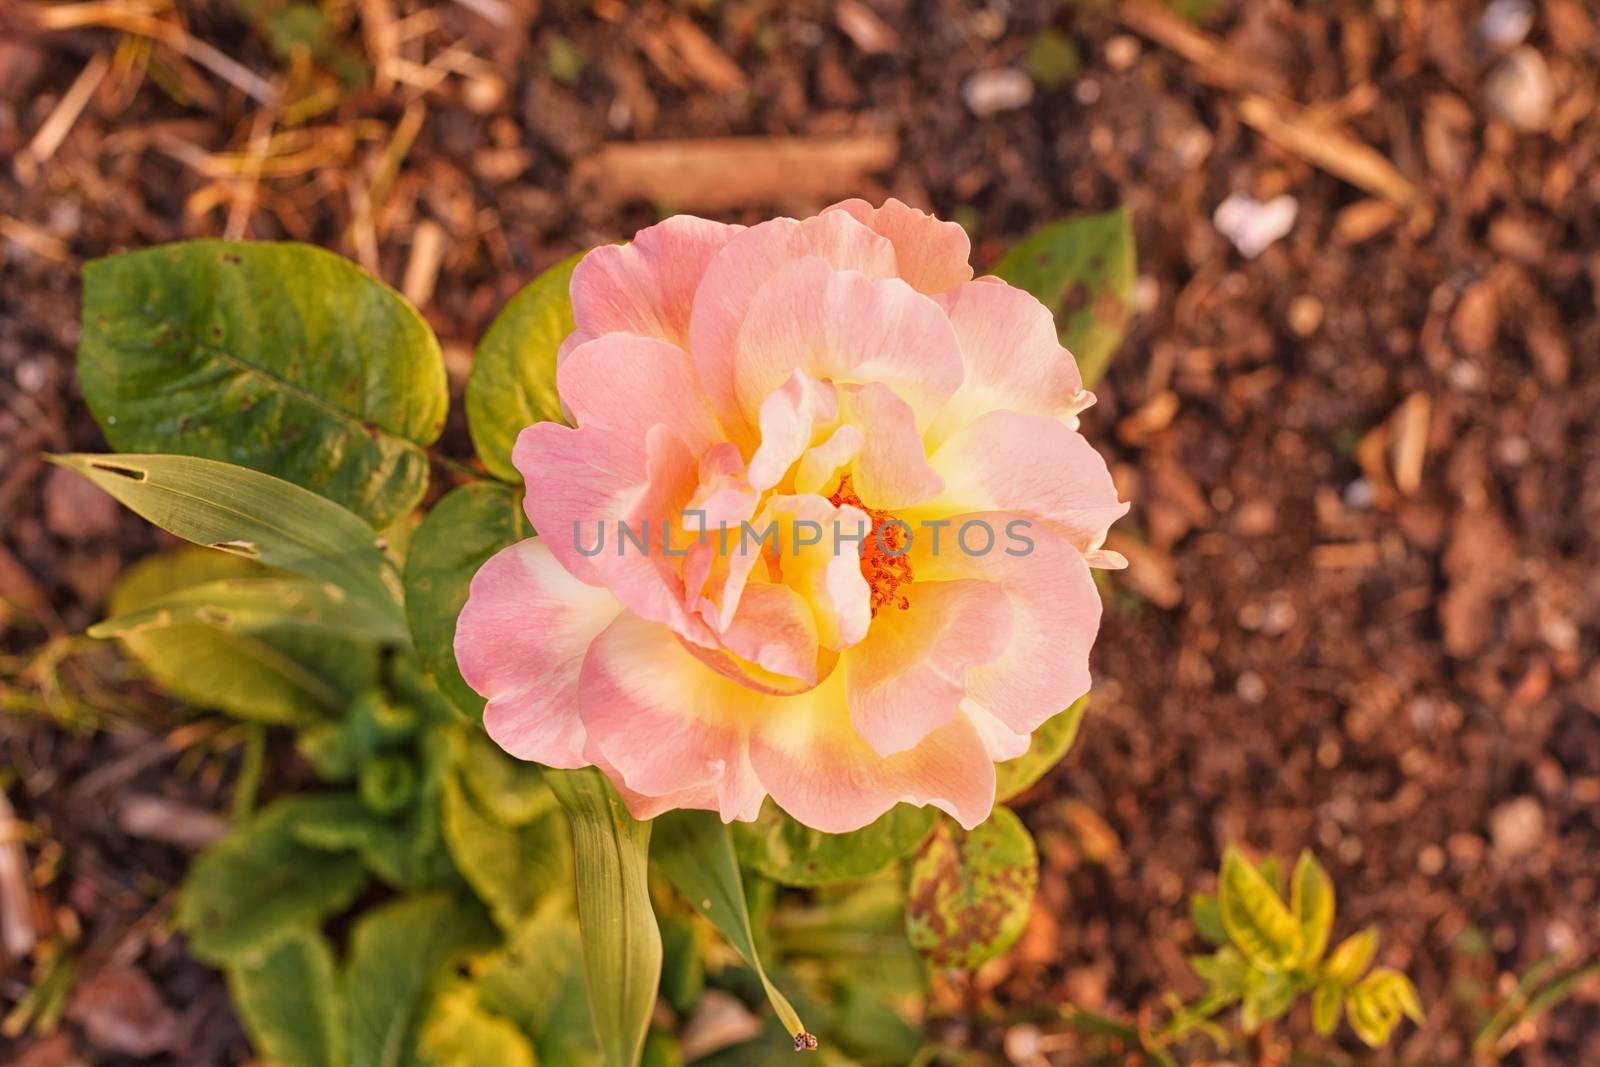 Variegated pretty pink and yellow rose growing on a small bush outdoors in the garden, symbolic of love and romance, overhead view